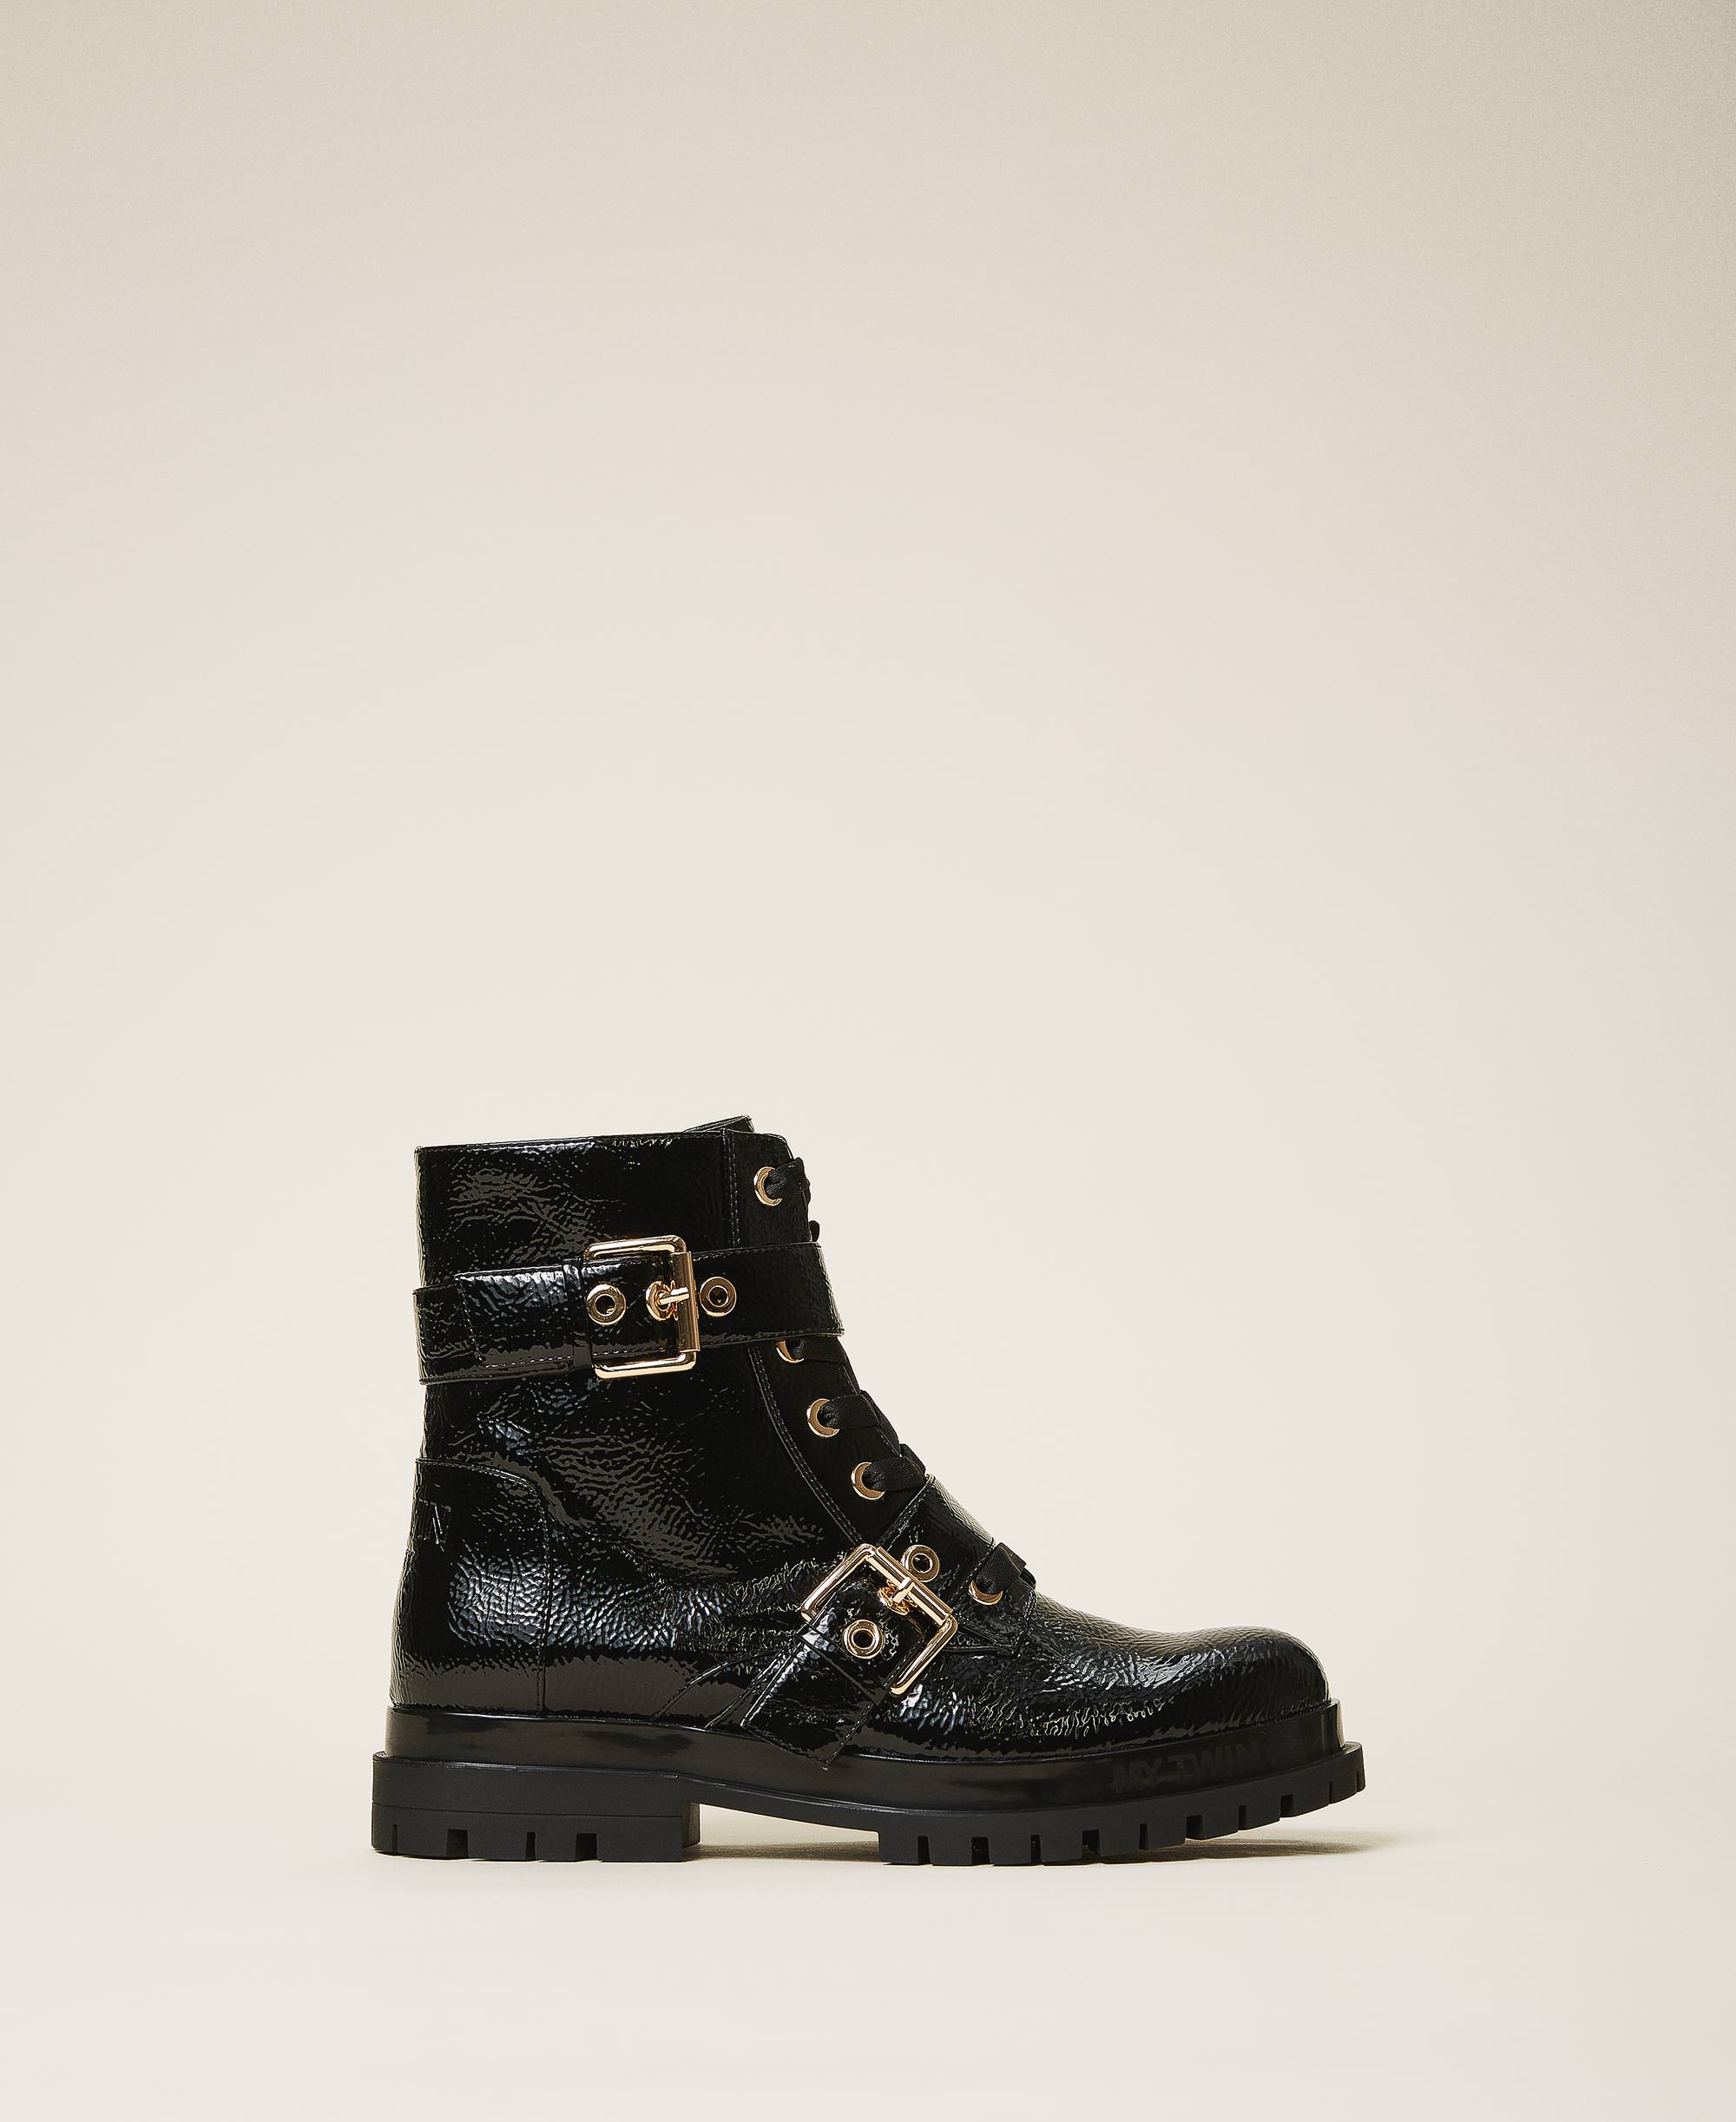 Patent leather biker boots